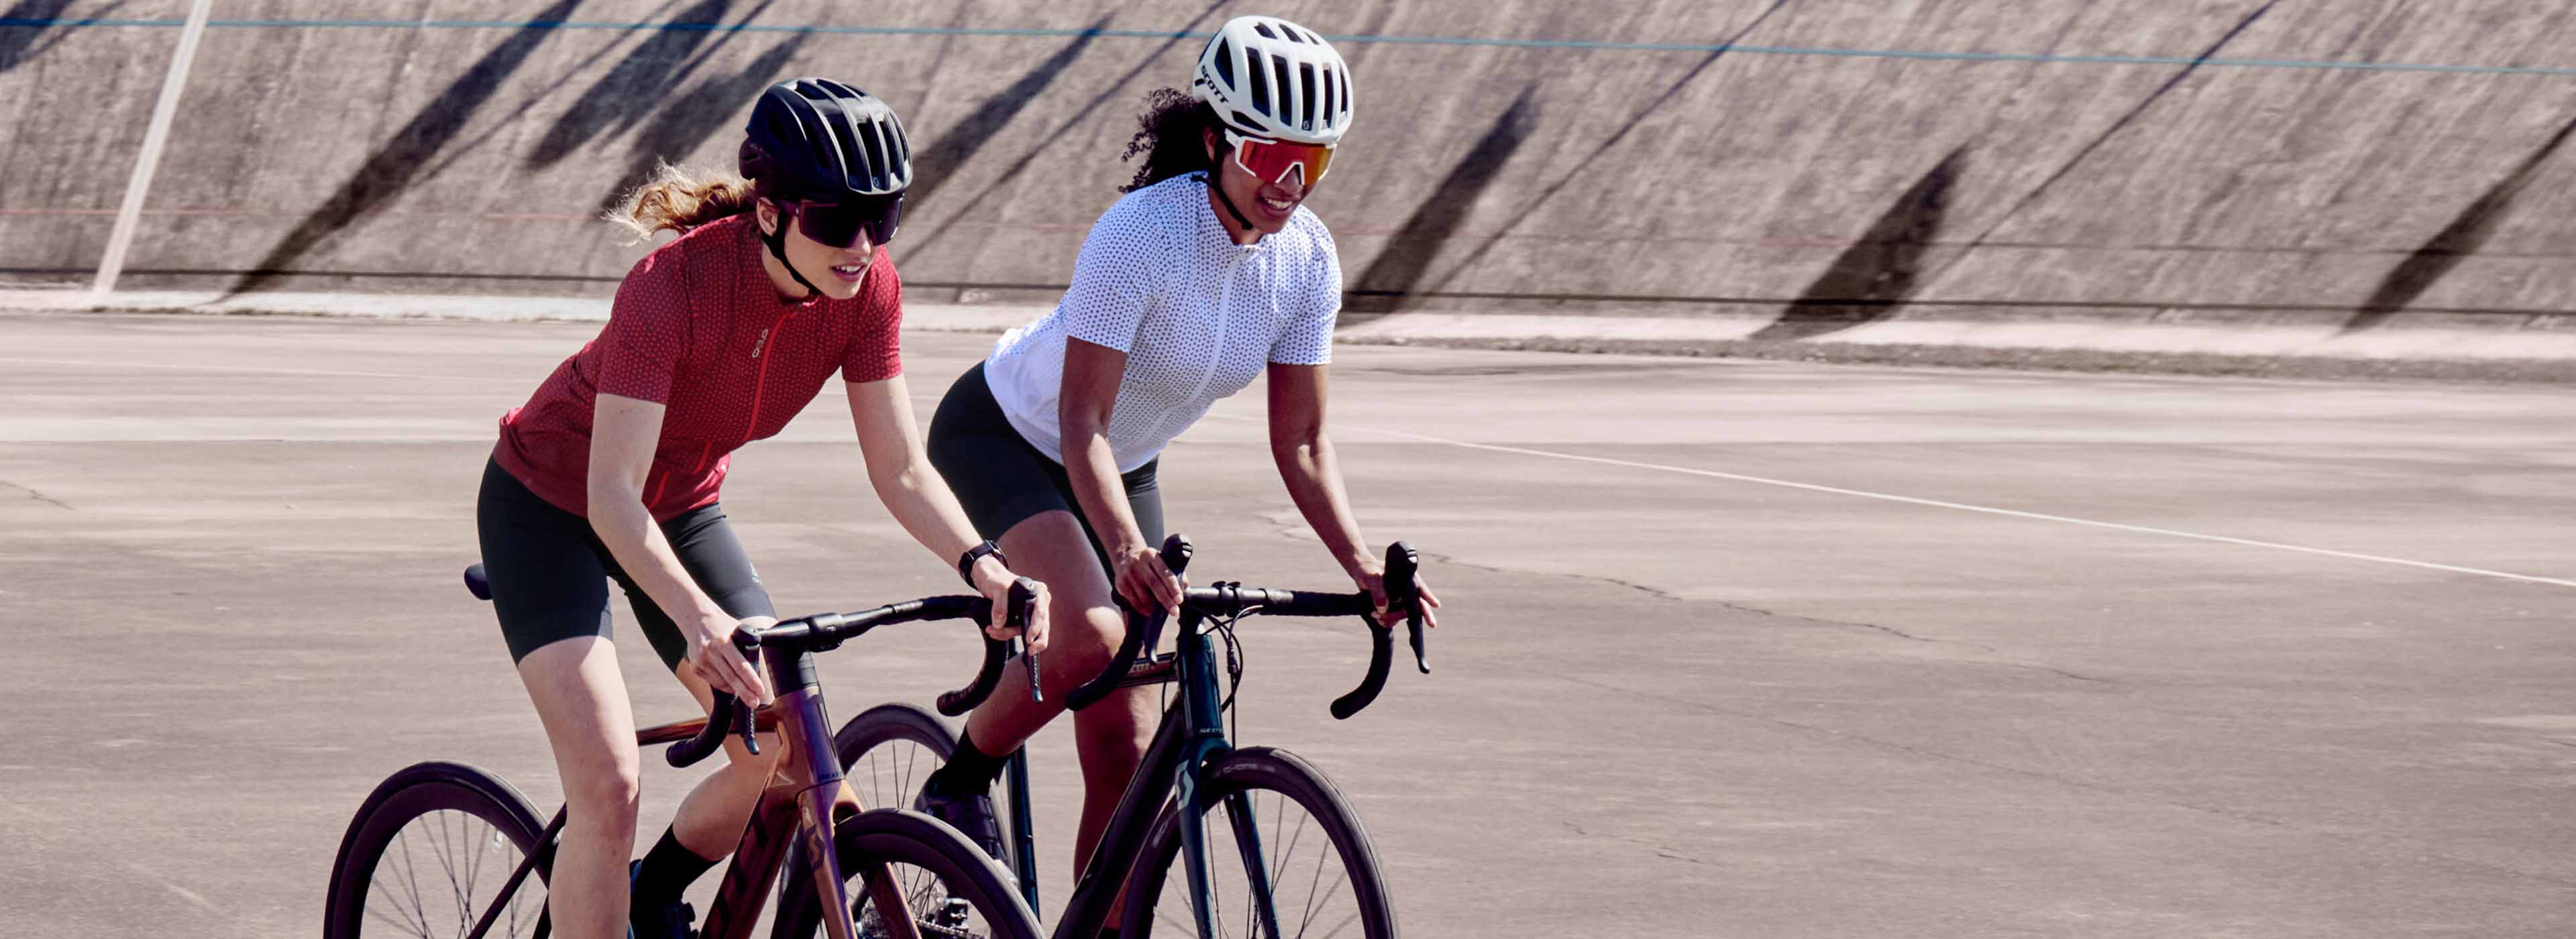 Discover the ODLO® collection for women now